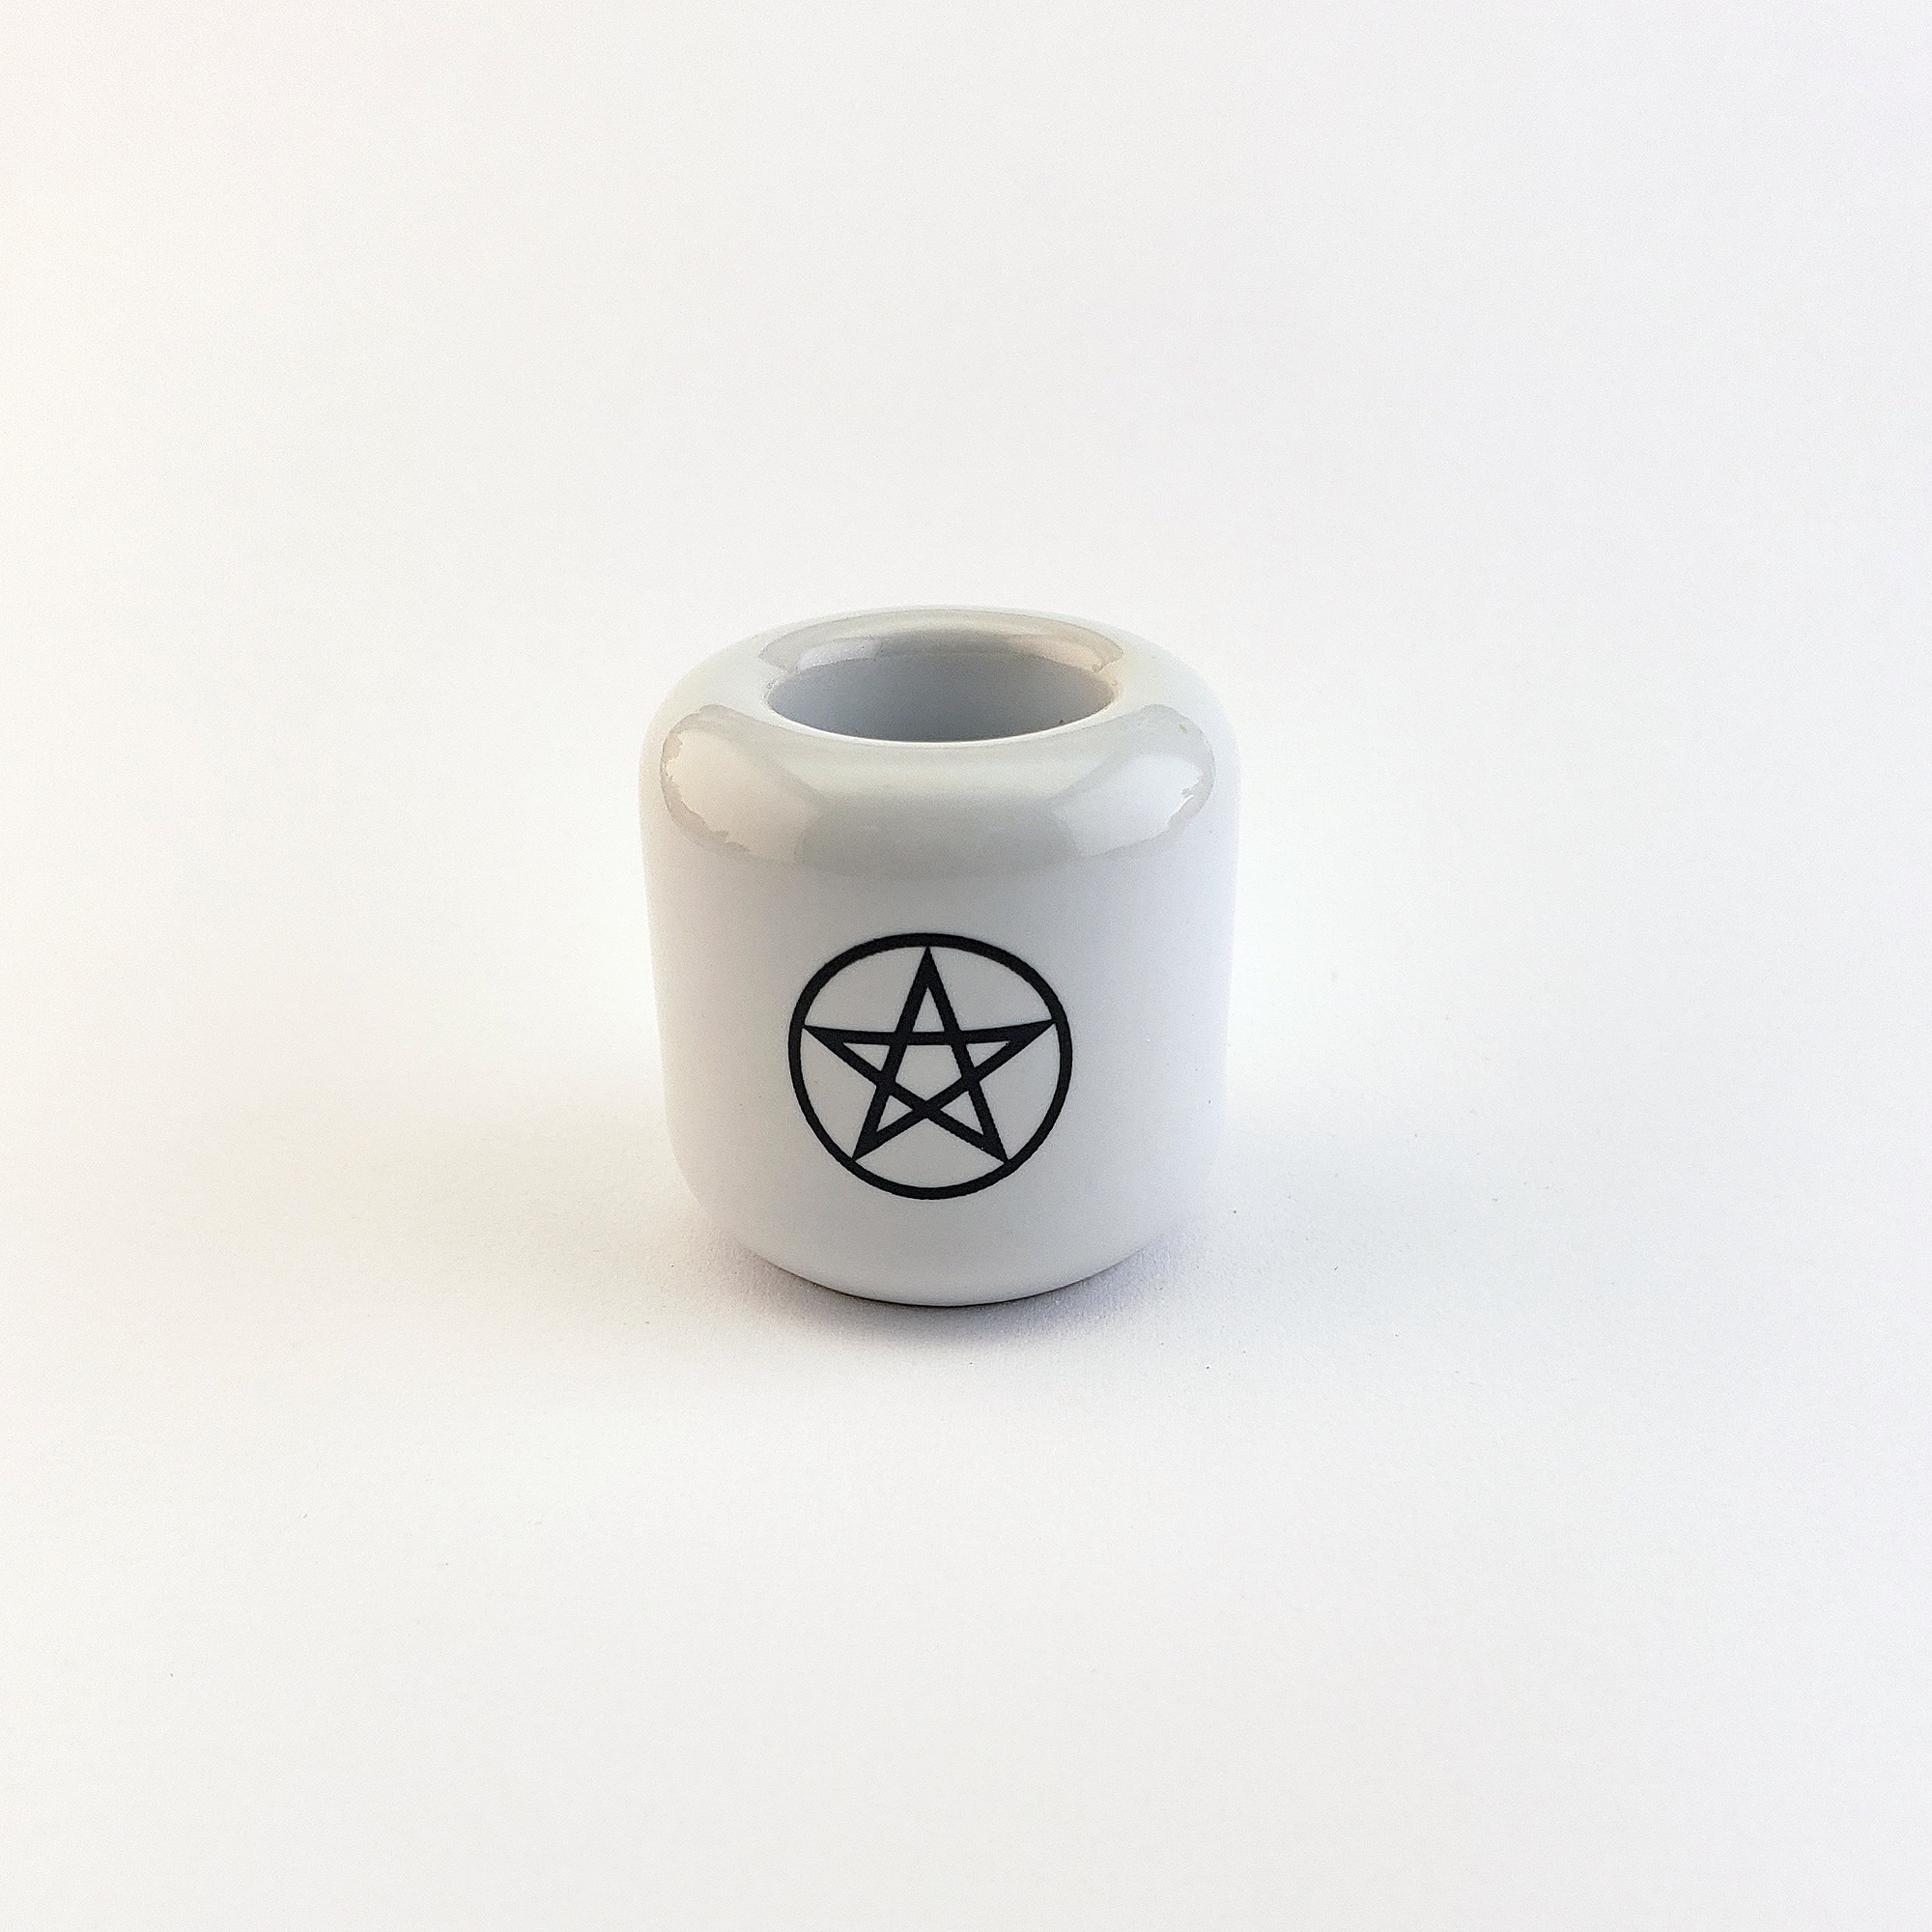 White Pentacle Ceramic Sphere Stand - Chime Candle Holder - Incense Holder